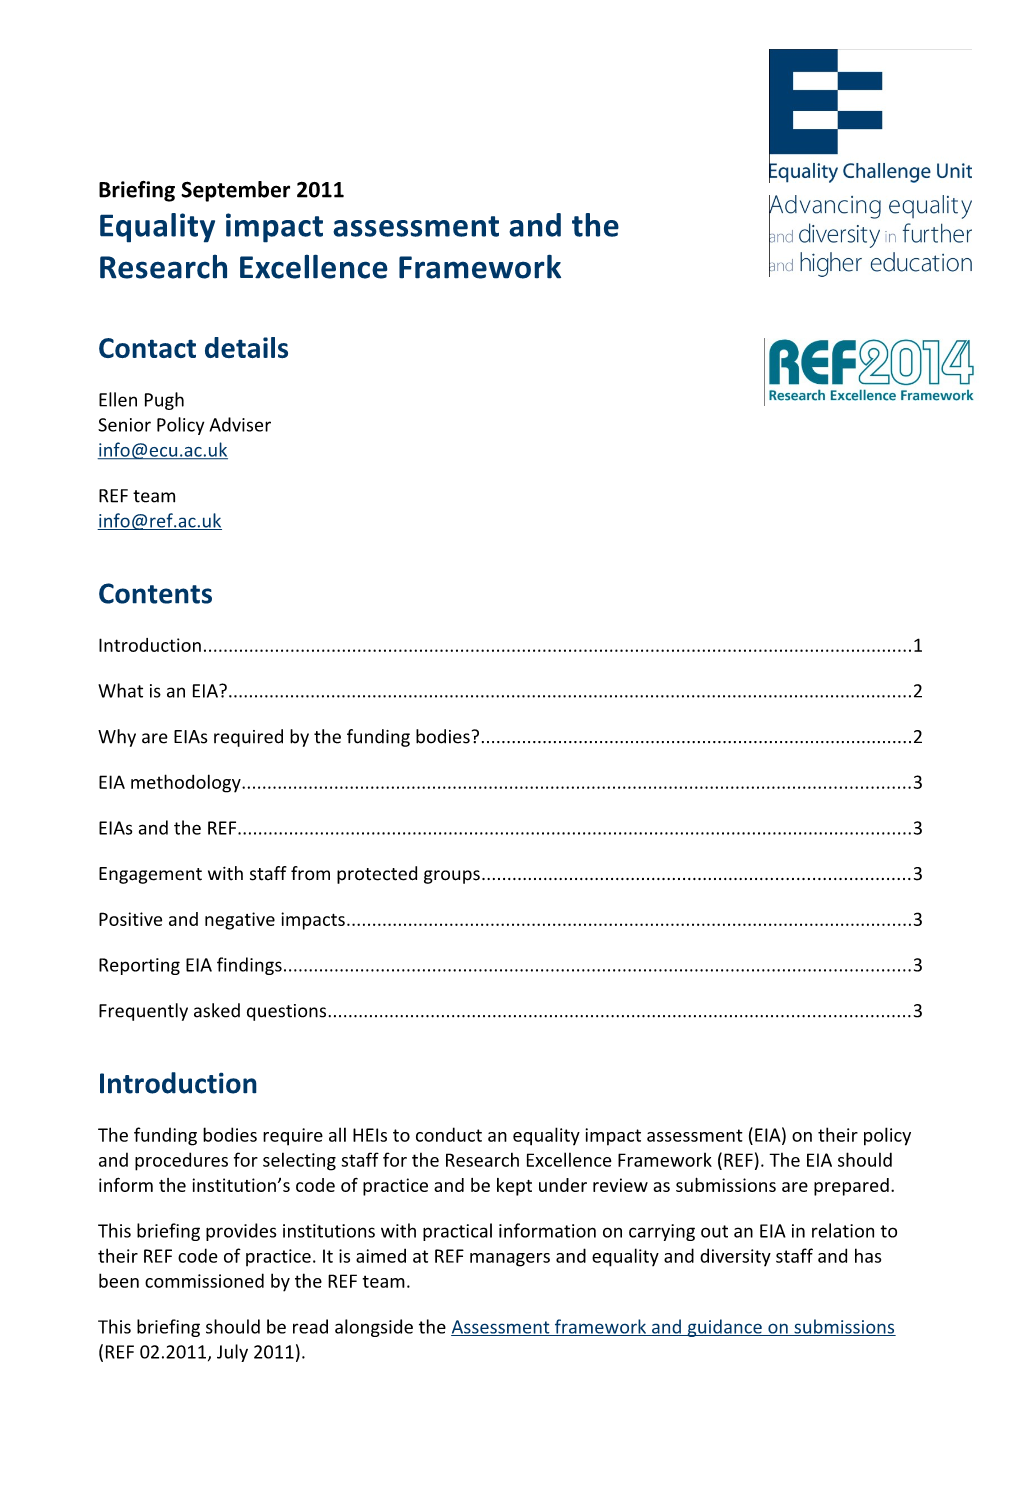 Equality Impact Assessment and the Research Excellence Framework